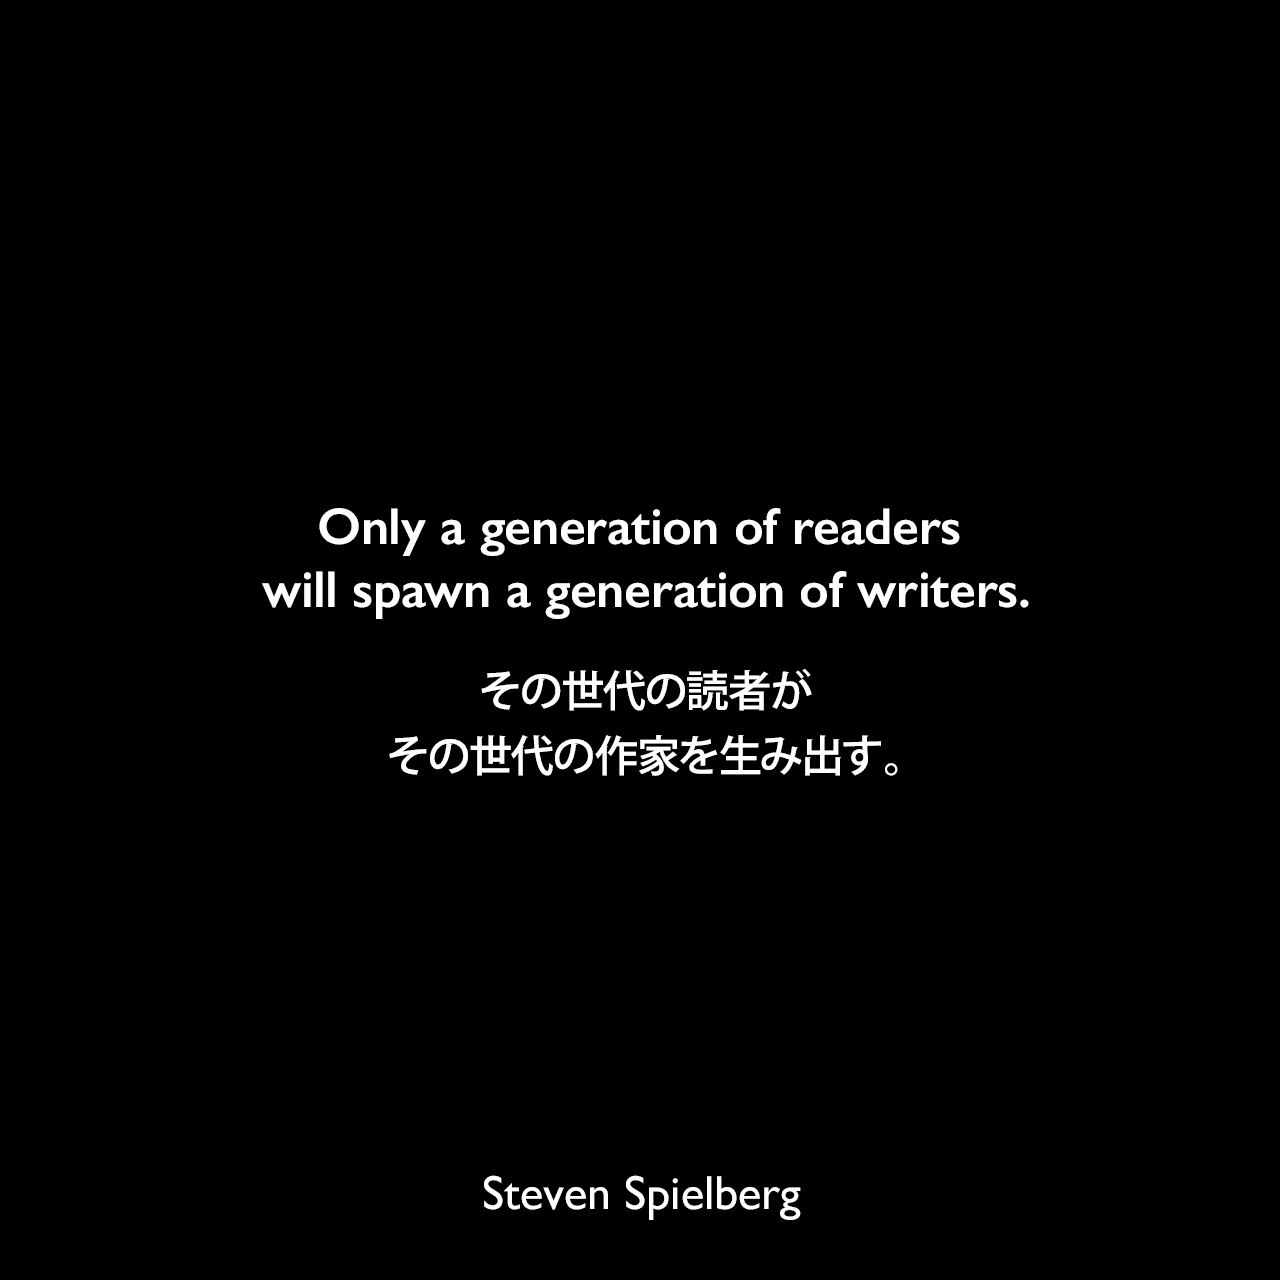 Only a generation of readers will spawn a generation of writers.その世代の読者が、その世代の作家を生み出す。Steven Spielberg